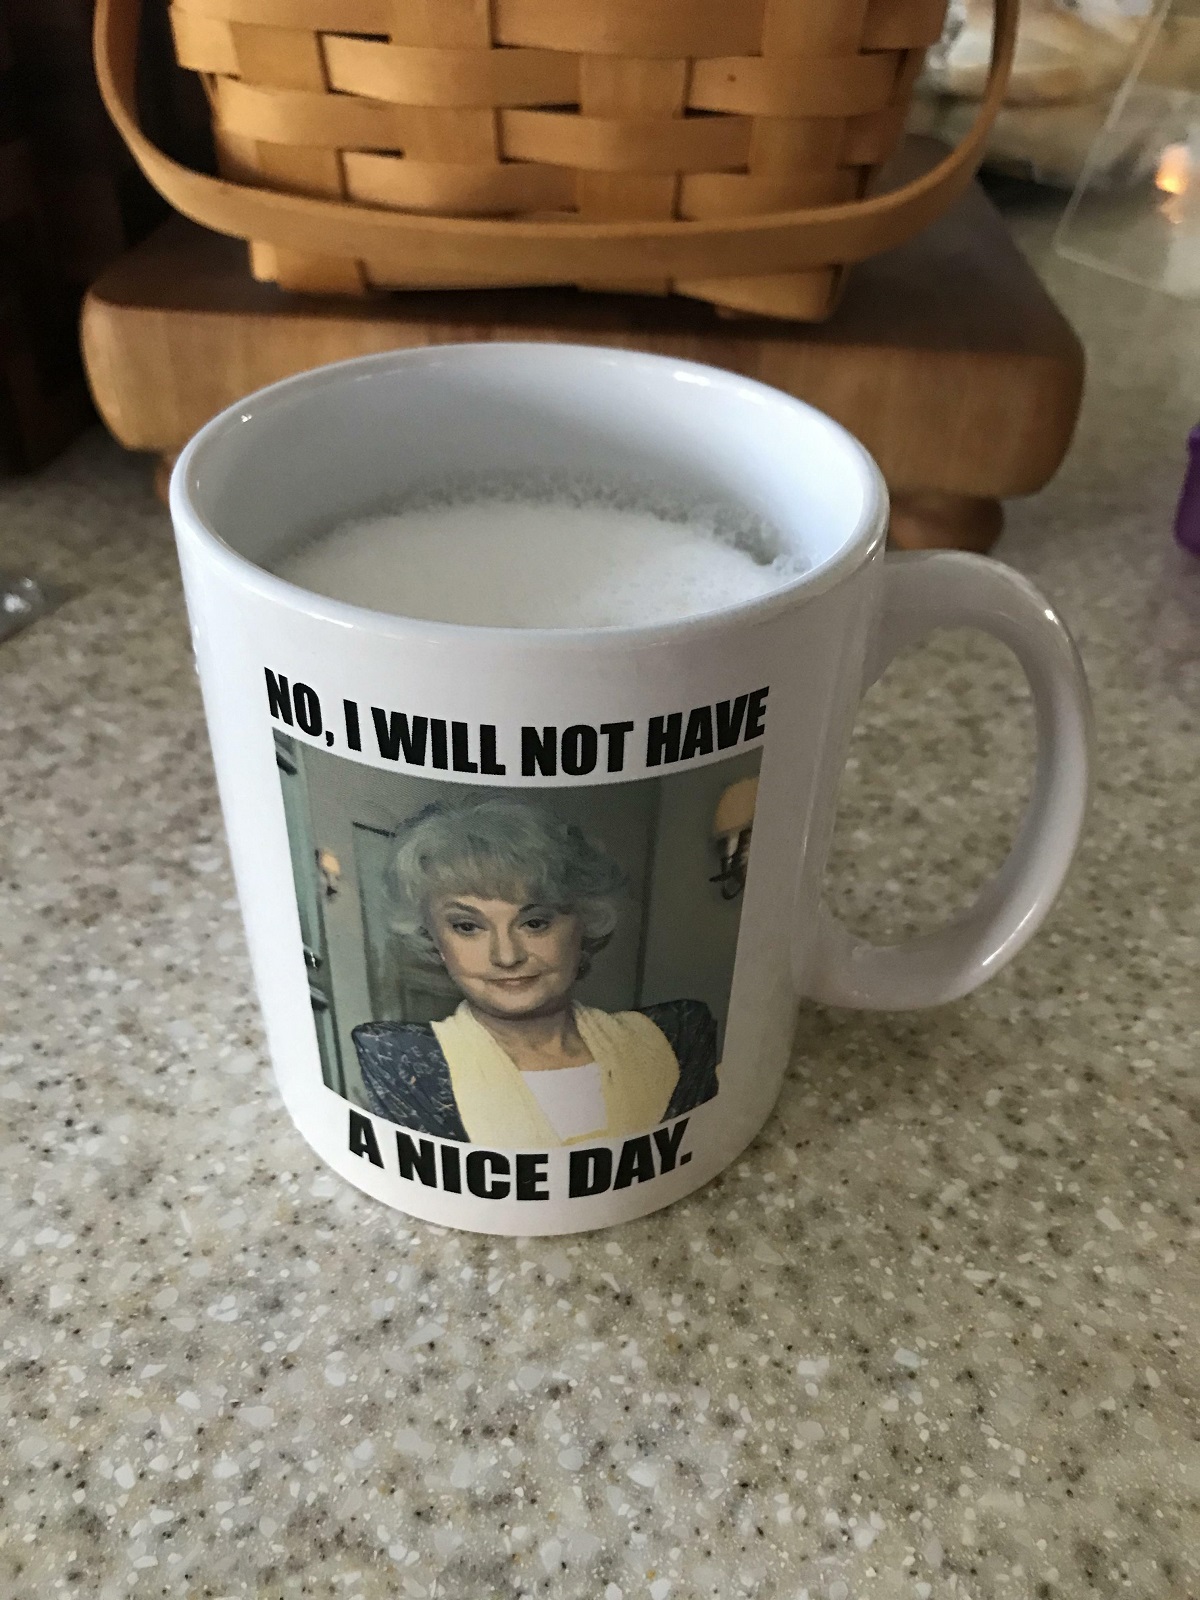 This Mornings Mug - With This Big Mug, I'll Probably Have A Good Day, And I Wish You All One Too!